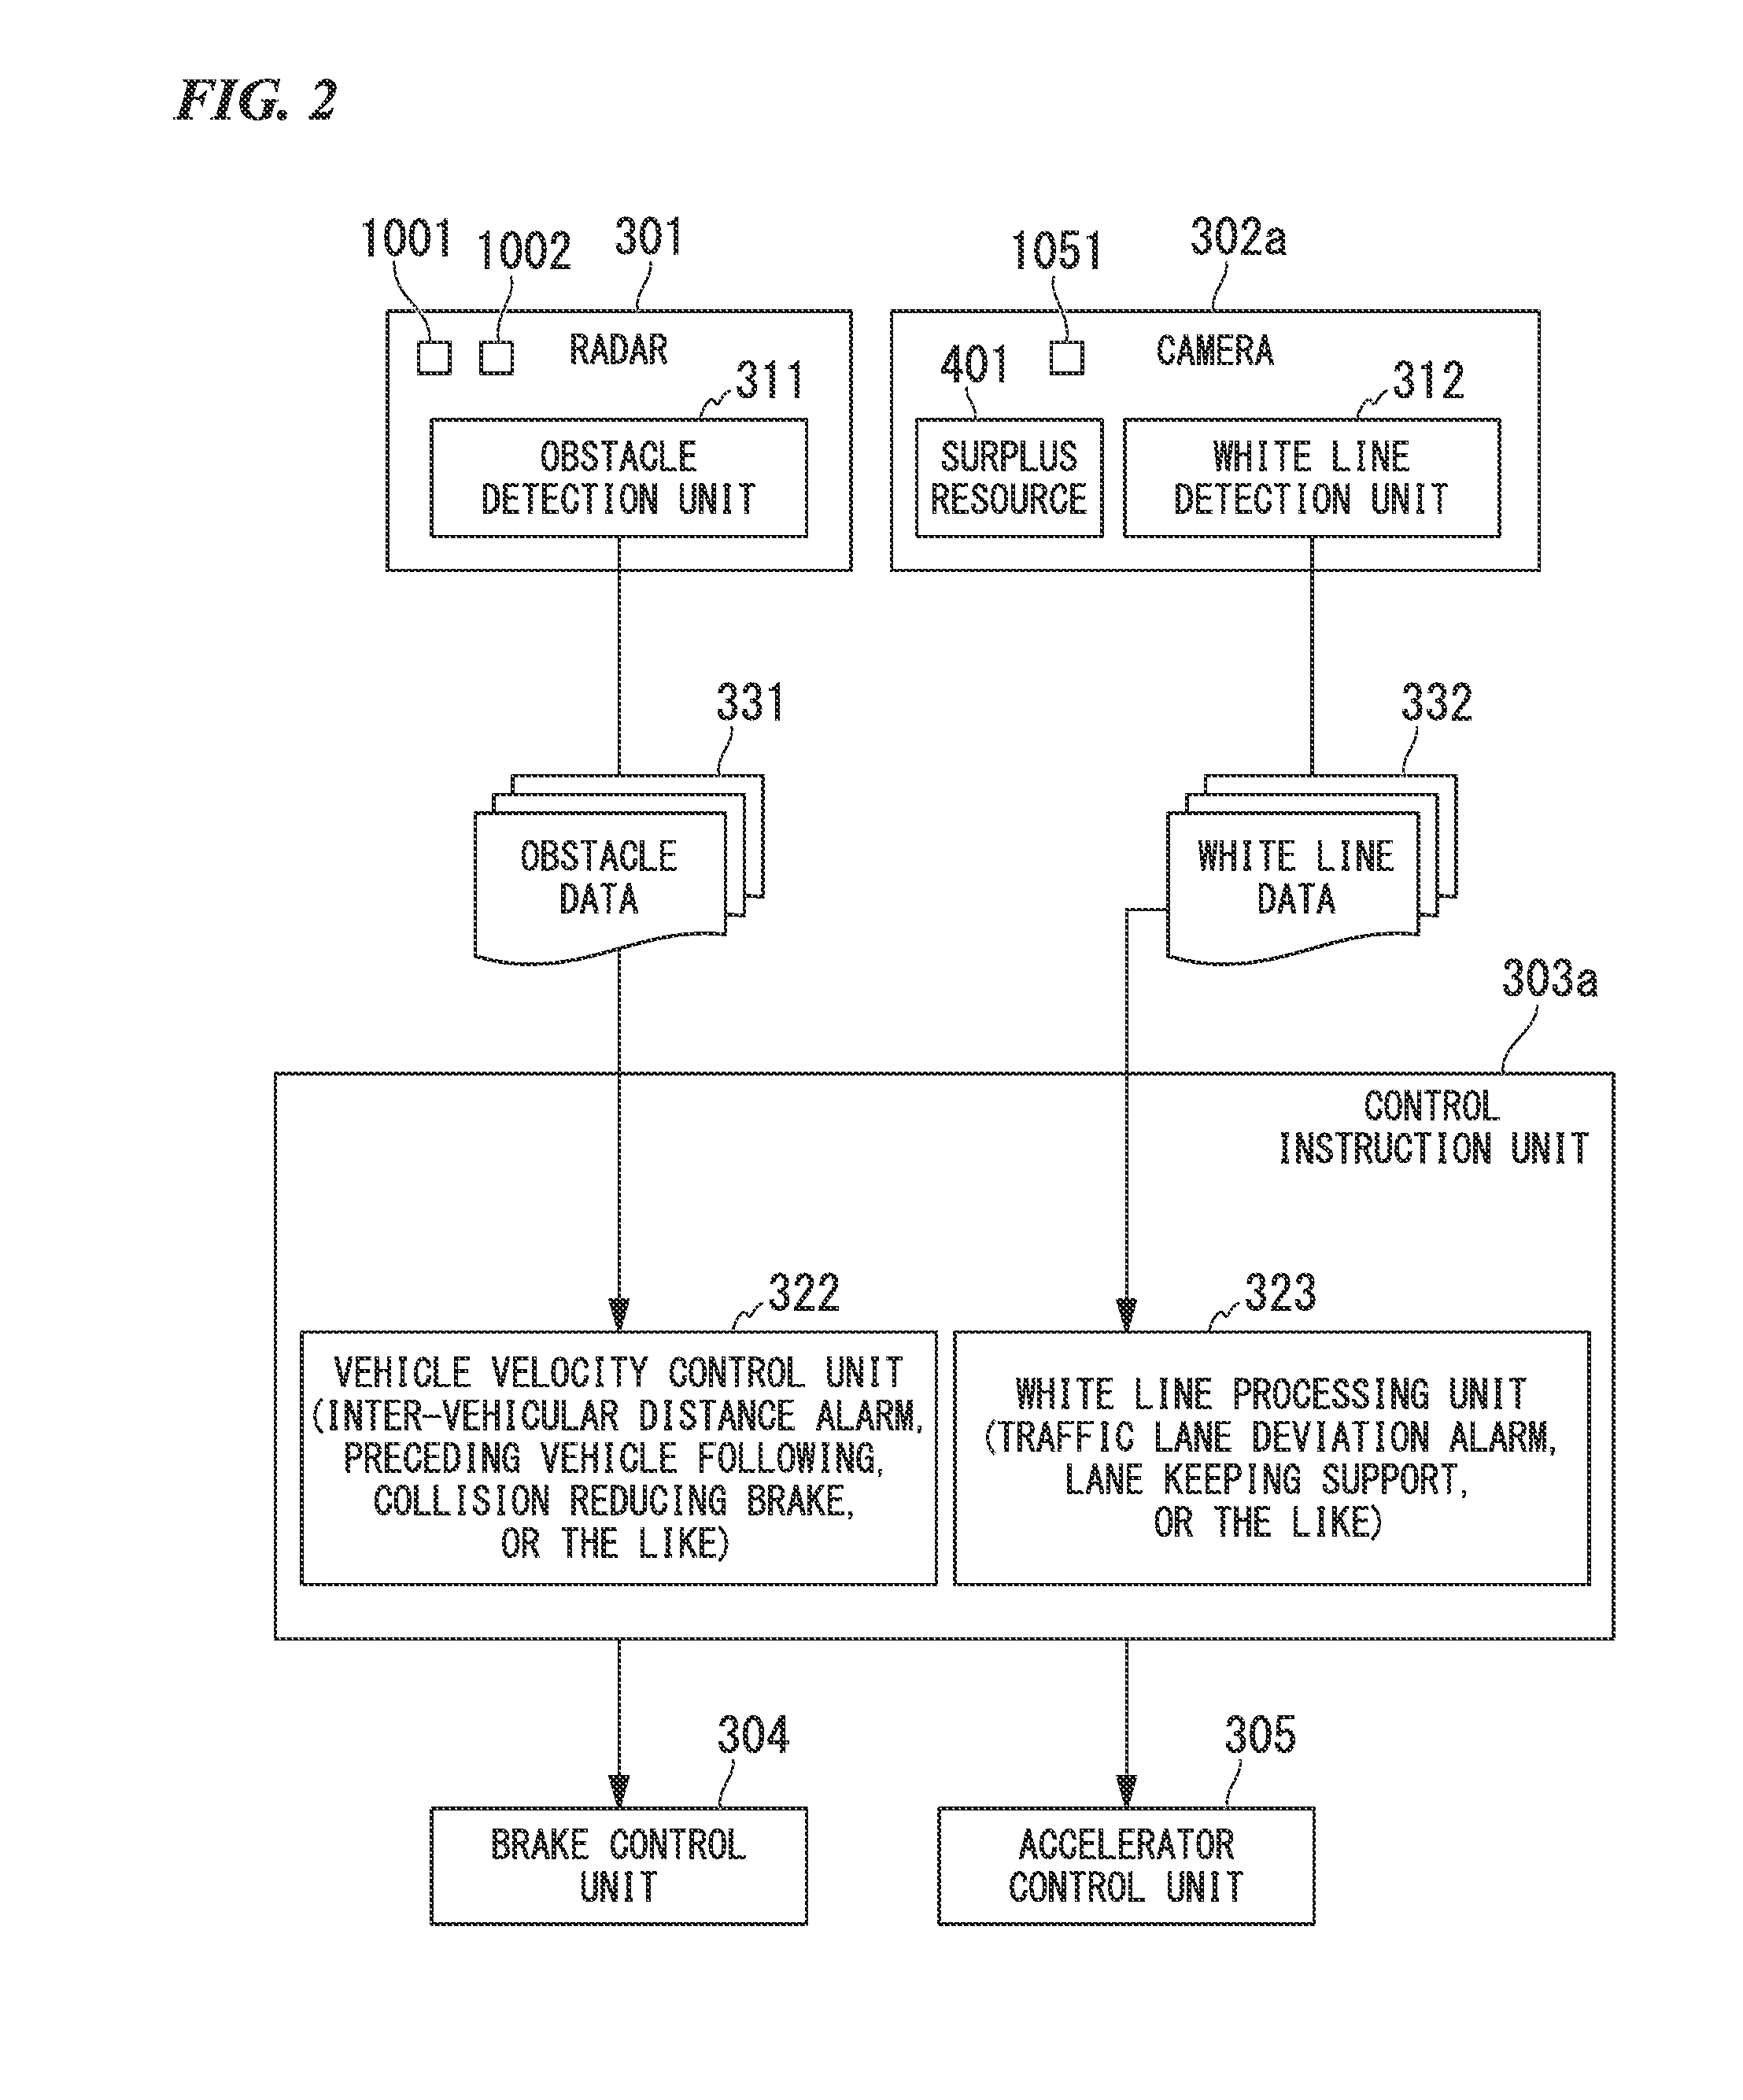 Obstacle detection apparatus and obstacle detection program